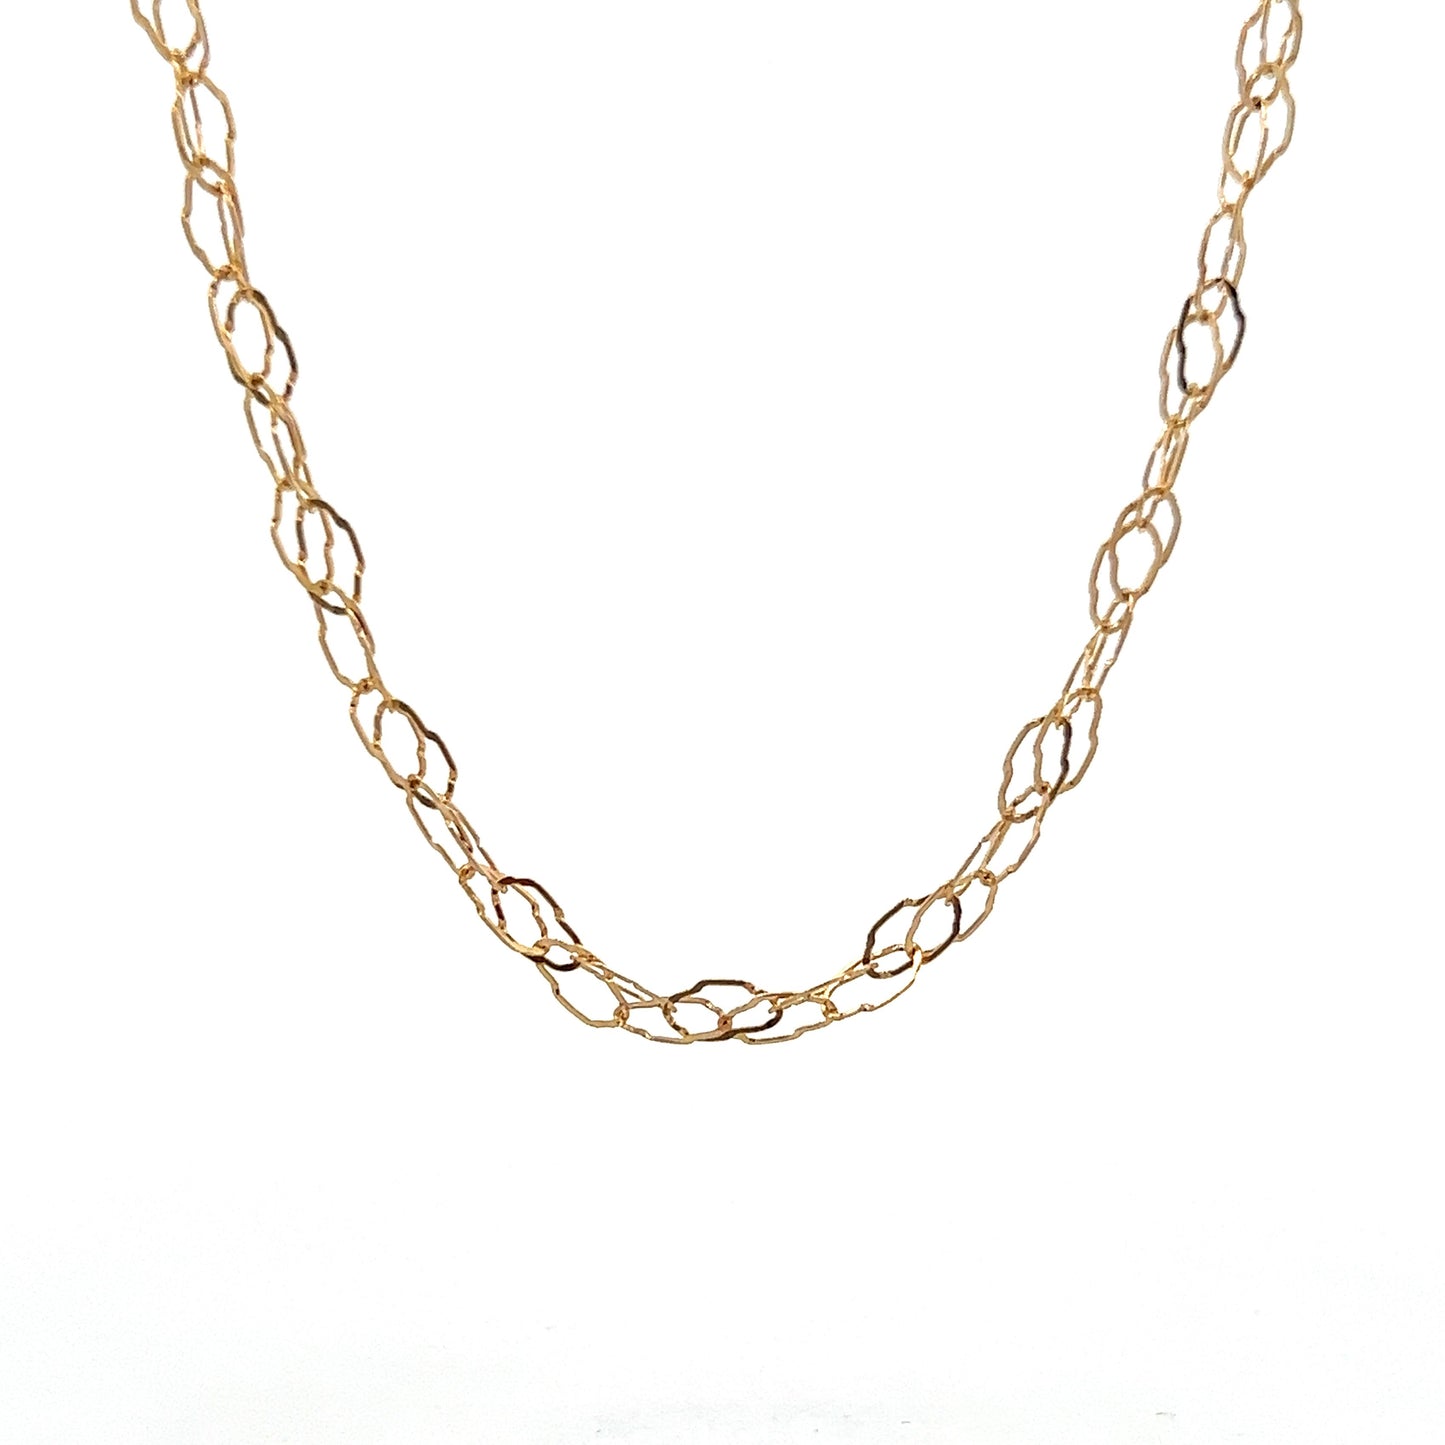 Organic Oval Link Chain Necklace in 14k Yellow Gold